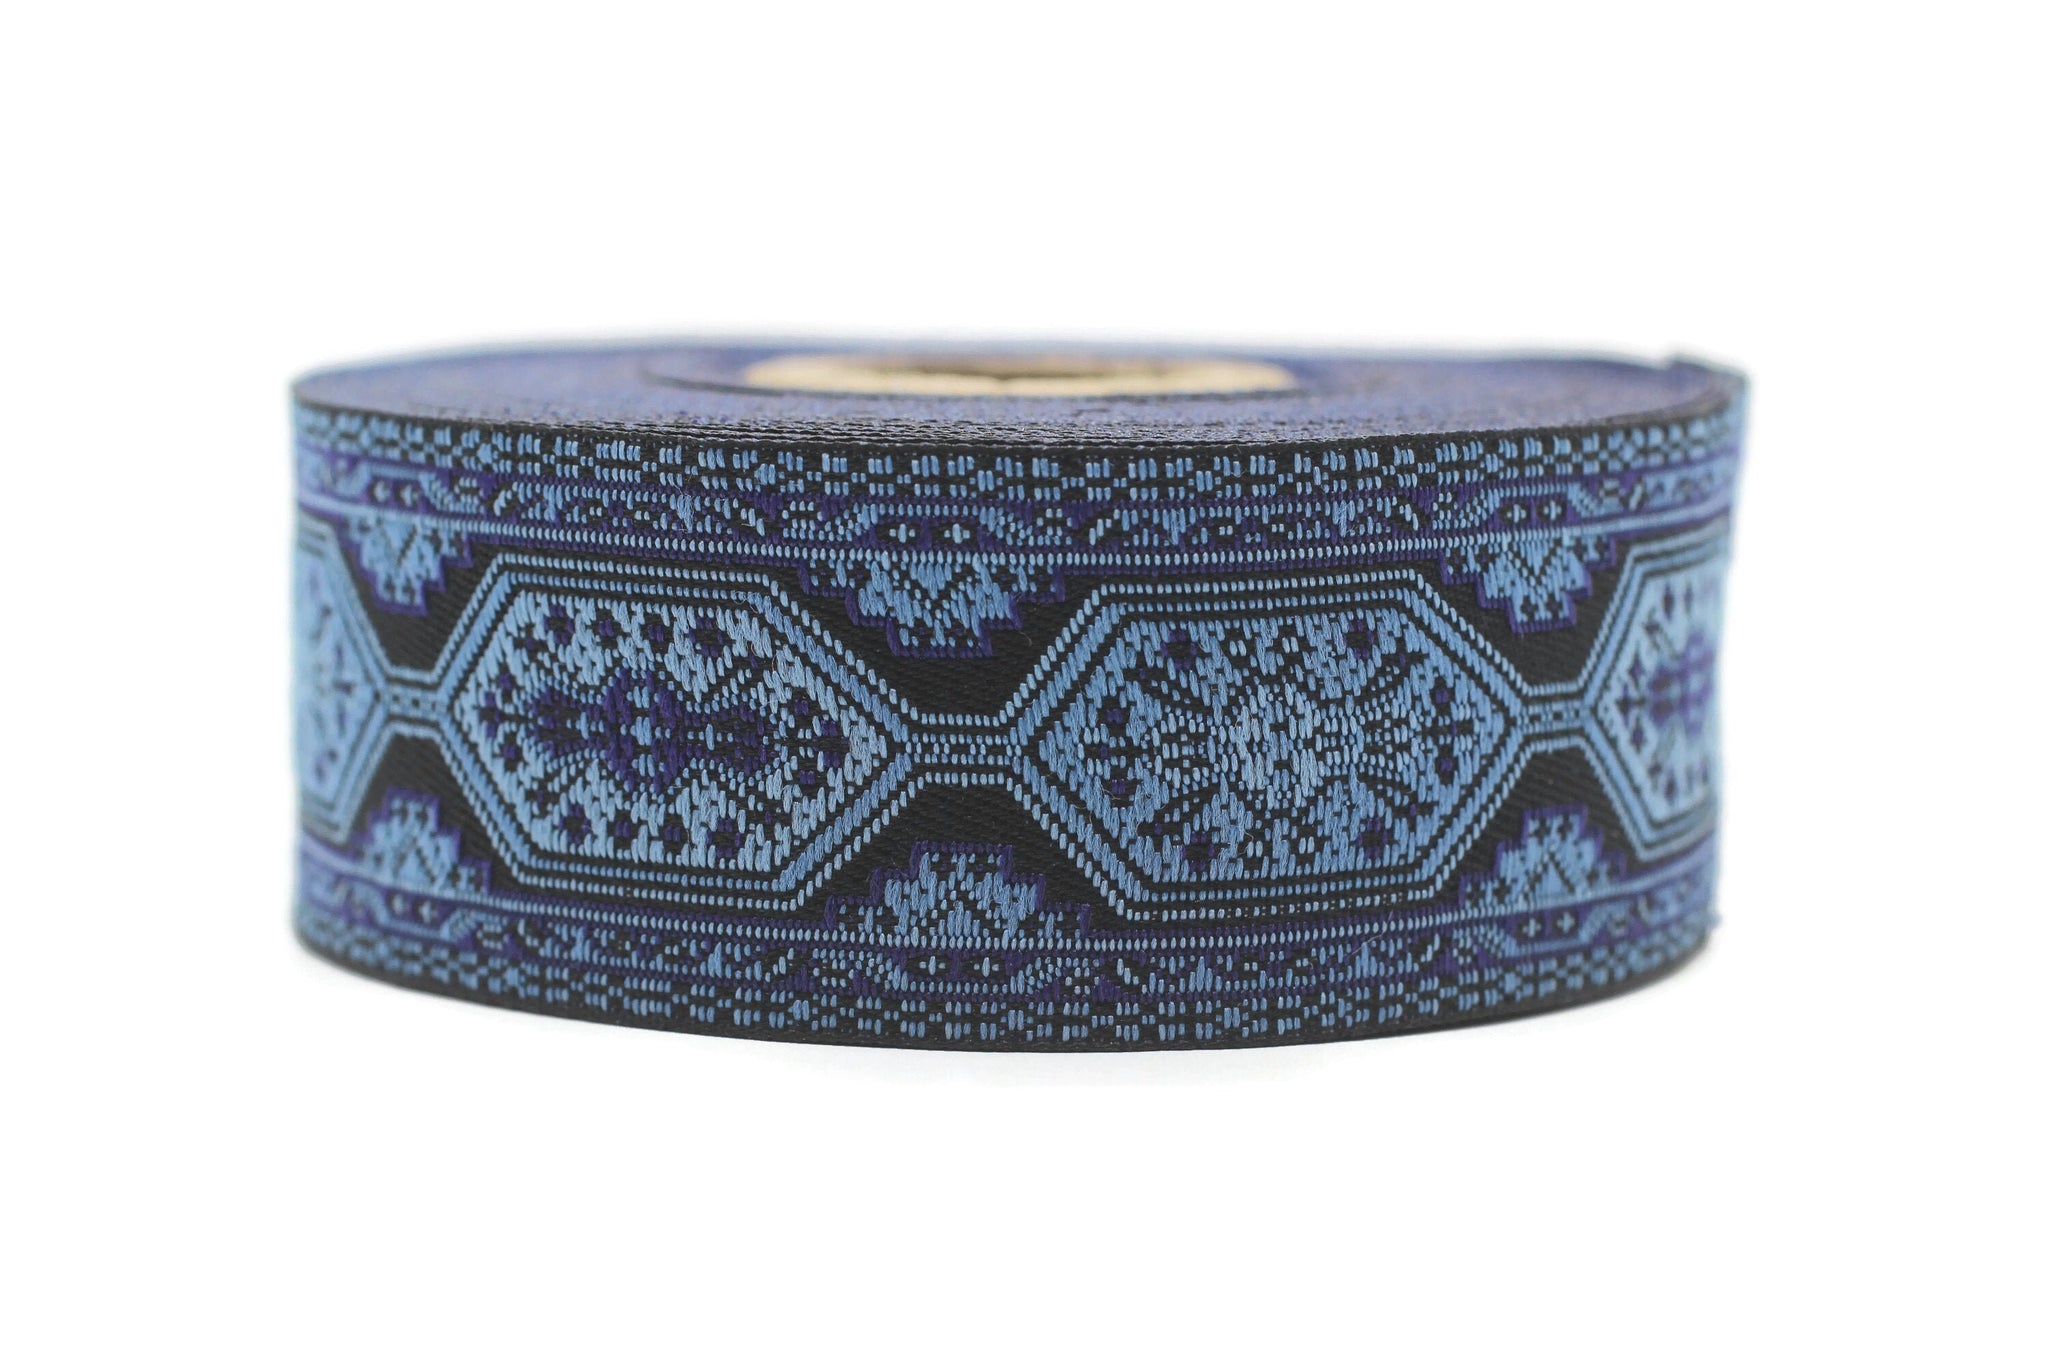 35 mm Shades of Blue Woven Jacquard Ribbons (1.37 inches), Decorative Craft Ribbon, Sewing trim, woven trim, embroidered ribbon, 35588